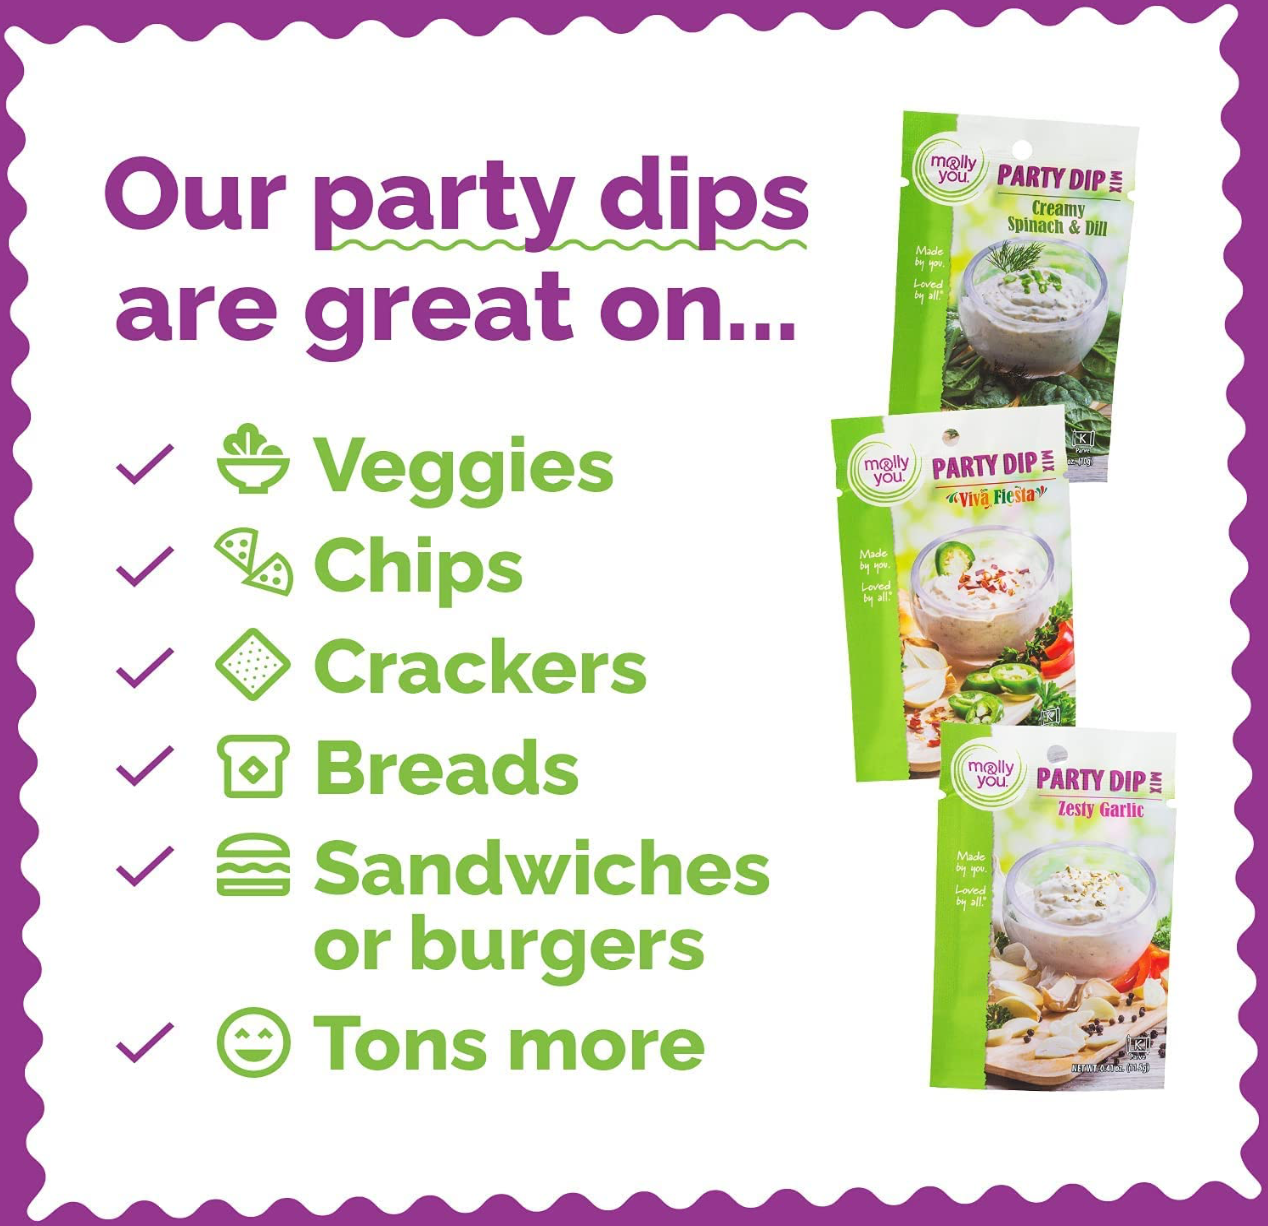 Our party dips are great on...veggies, chips, crackers, breads, sandwiches or burgers, tons more!